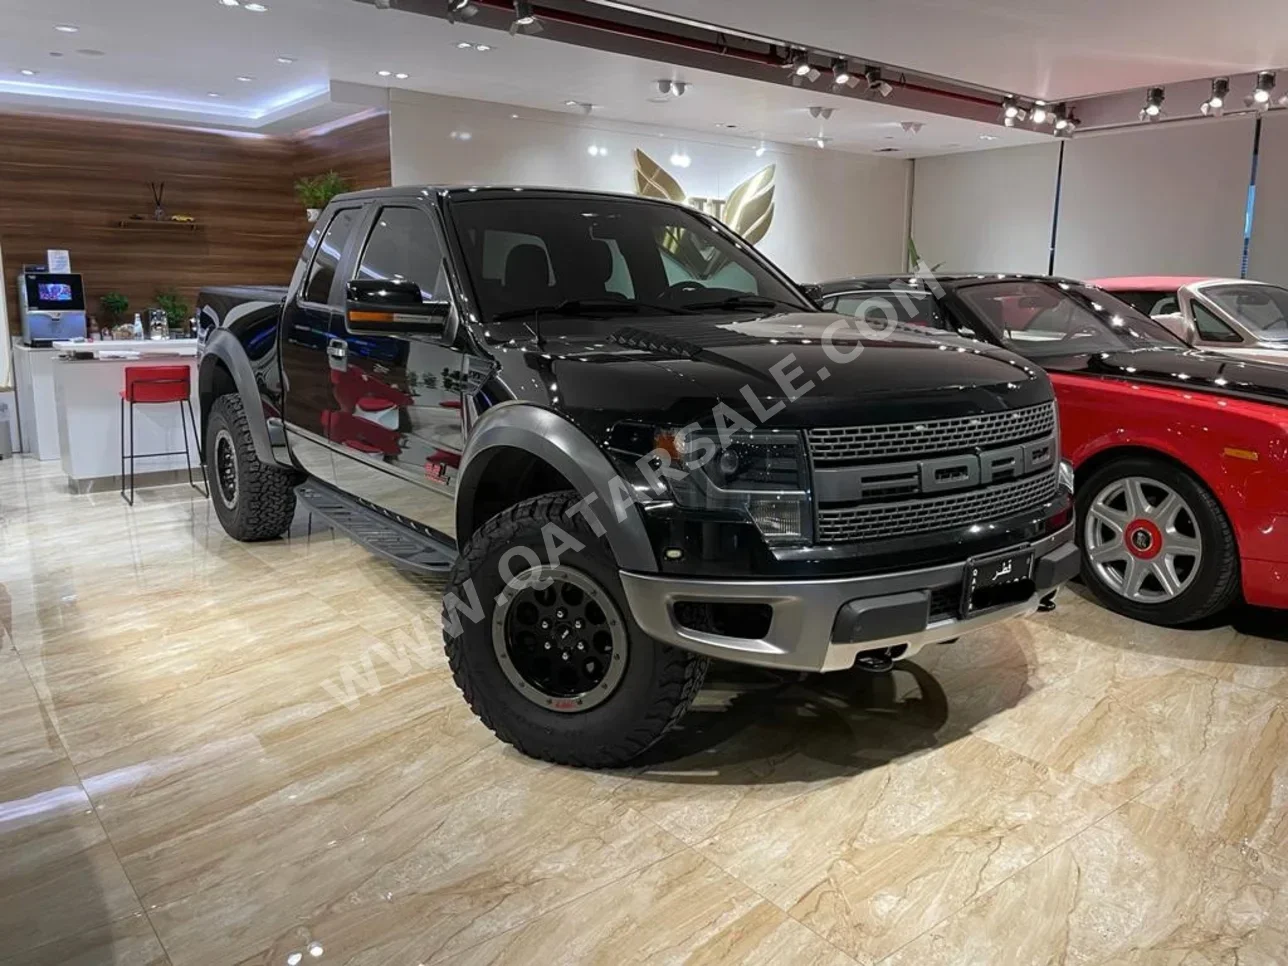 Ford  Raptor  Roche  2014  Automatic  99,000 Km  8 Cylinder  Four Wheel Drive (4WD)  Pick Up  Black